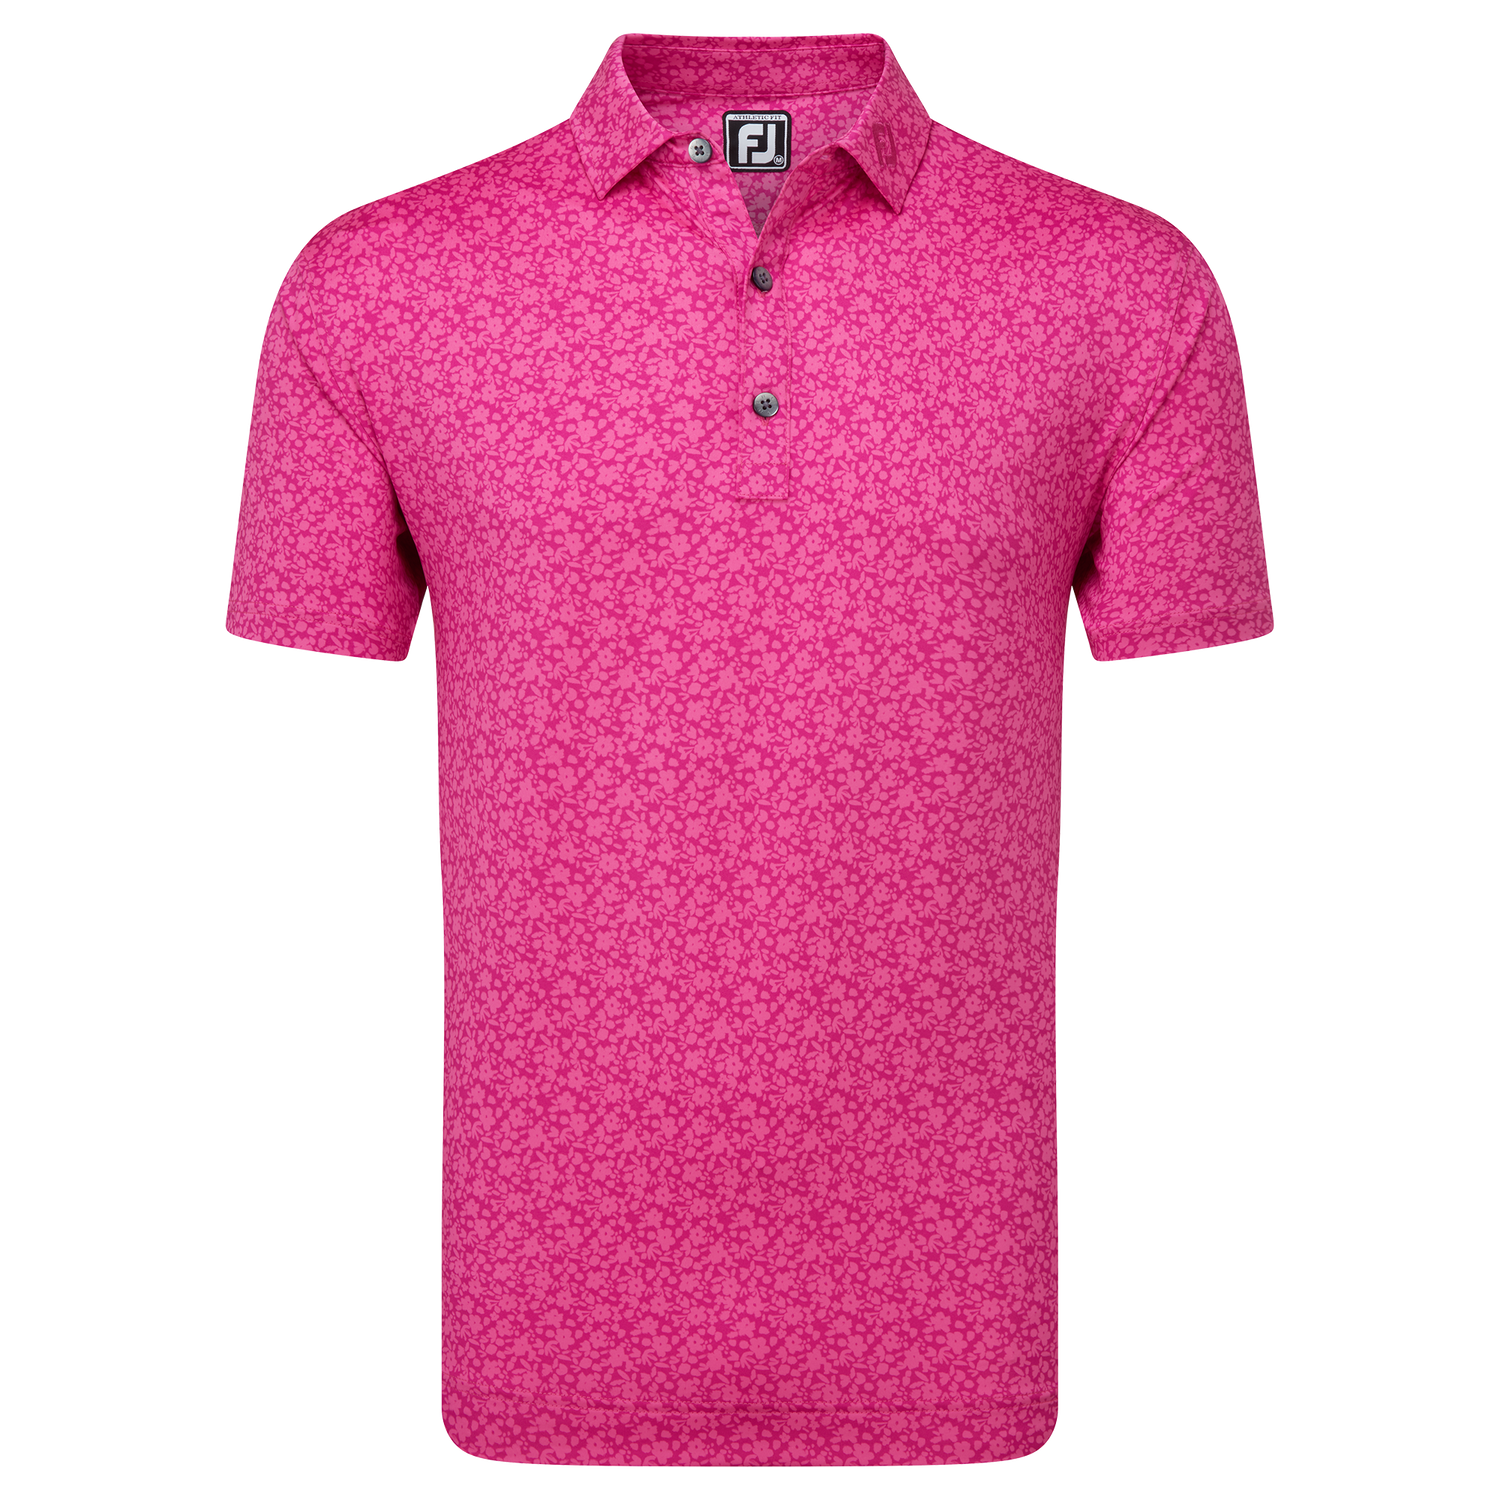 FootJoy Golf Painted Floral Polo Shirt 81616 Berry M 